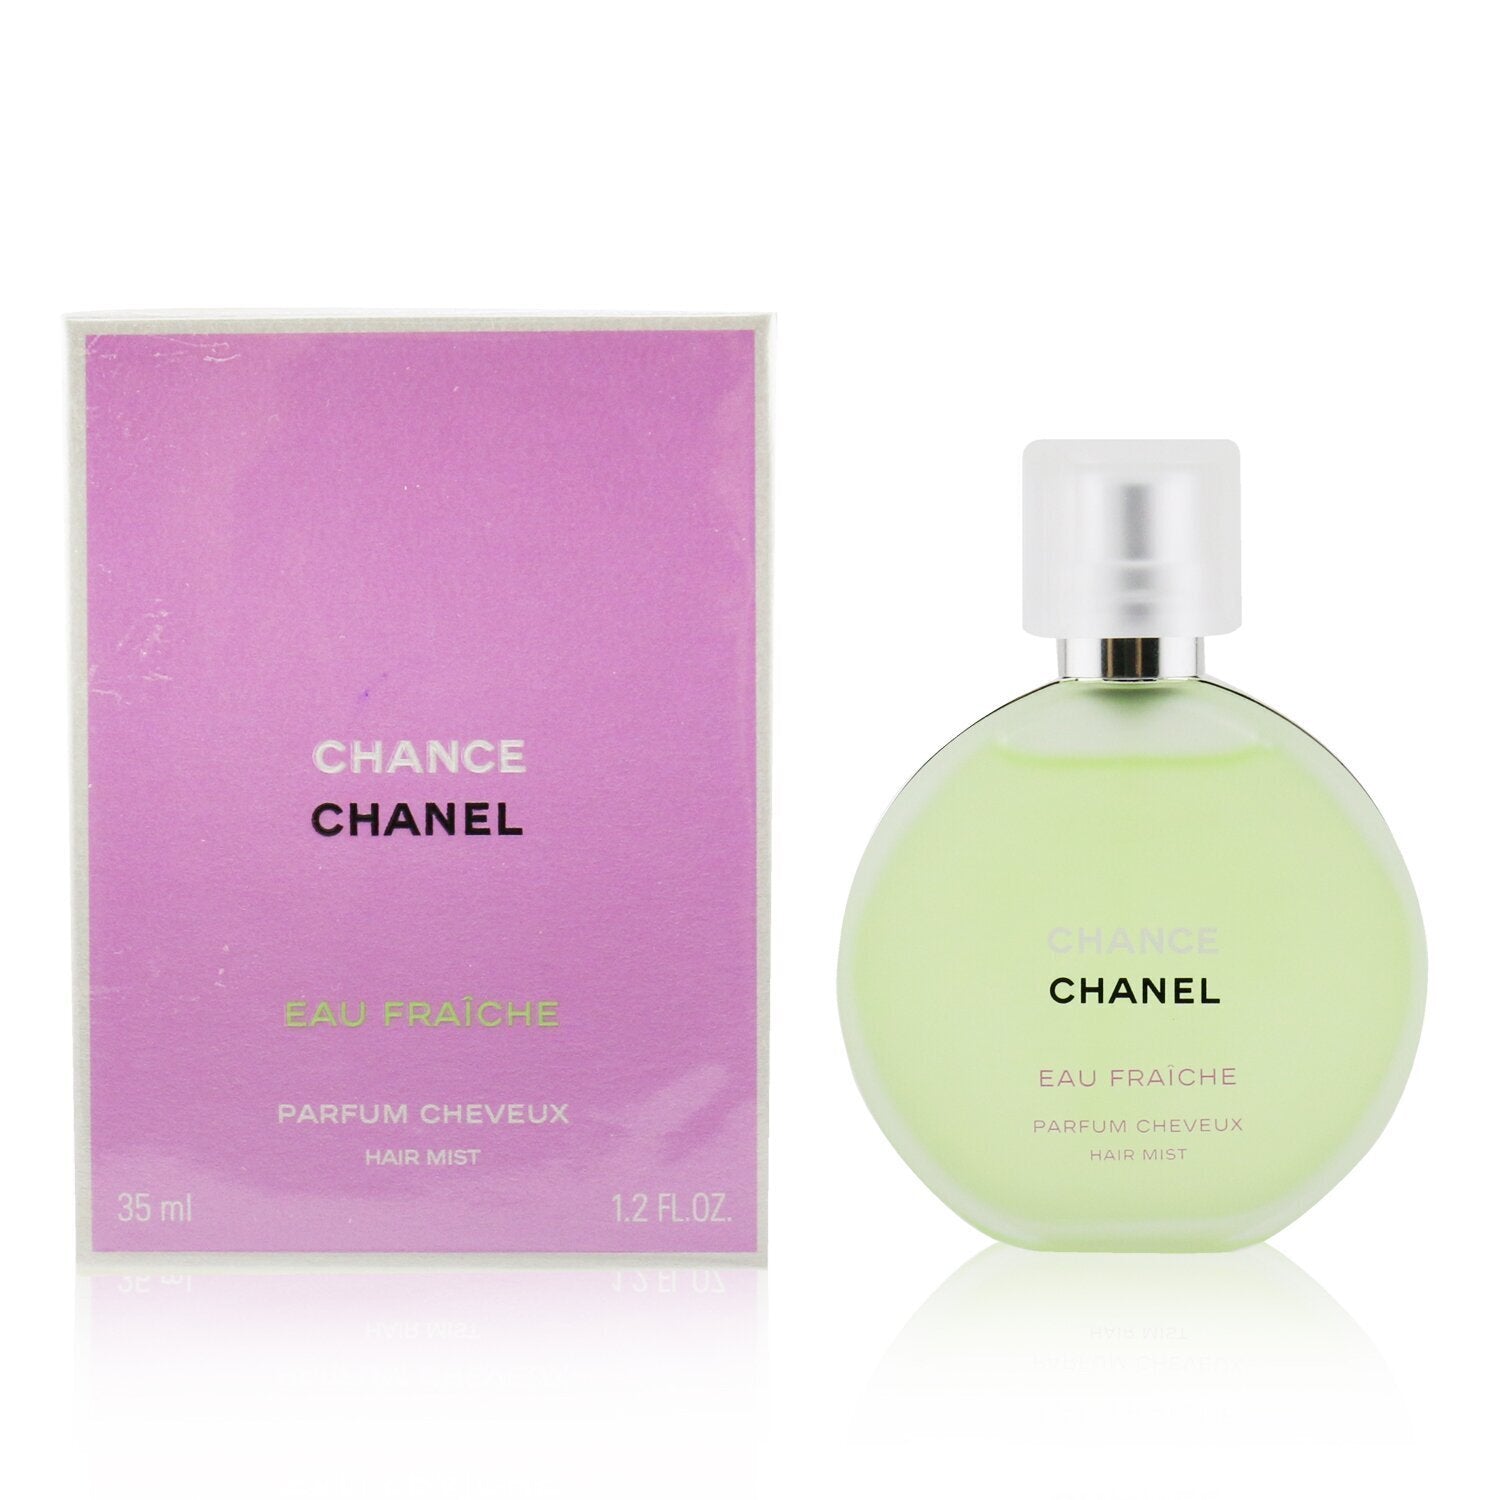 MY CURRENT PERFUME OBSESSION  Chanel fragrance & Body Care haul